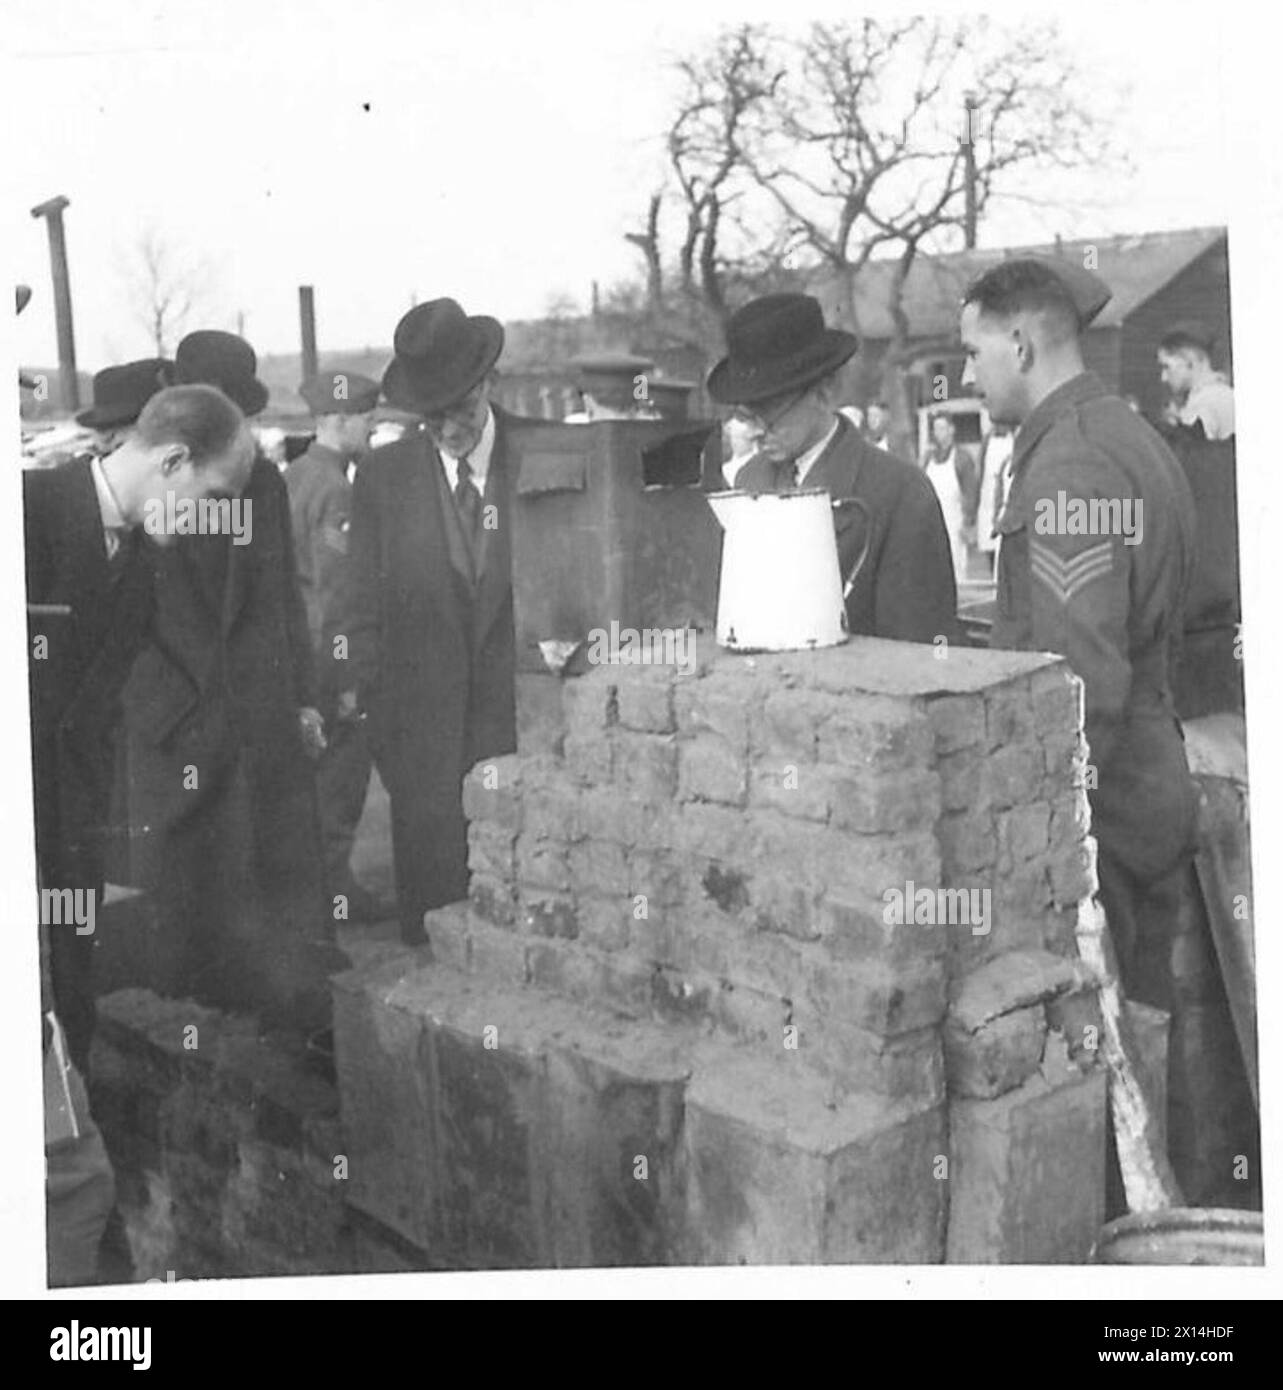 MEMBERS OF PARLIAMENT VISIT TRAINING CENTRE - Old petrol tins, bricks and cement go to make this field kitchen, which MPs are viewing with interest British Army Stock Photo